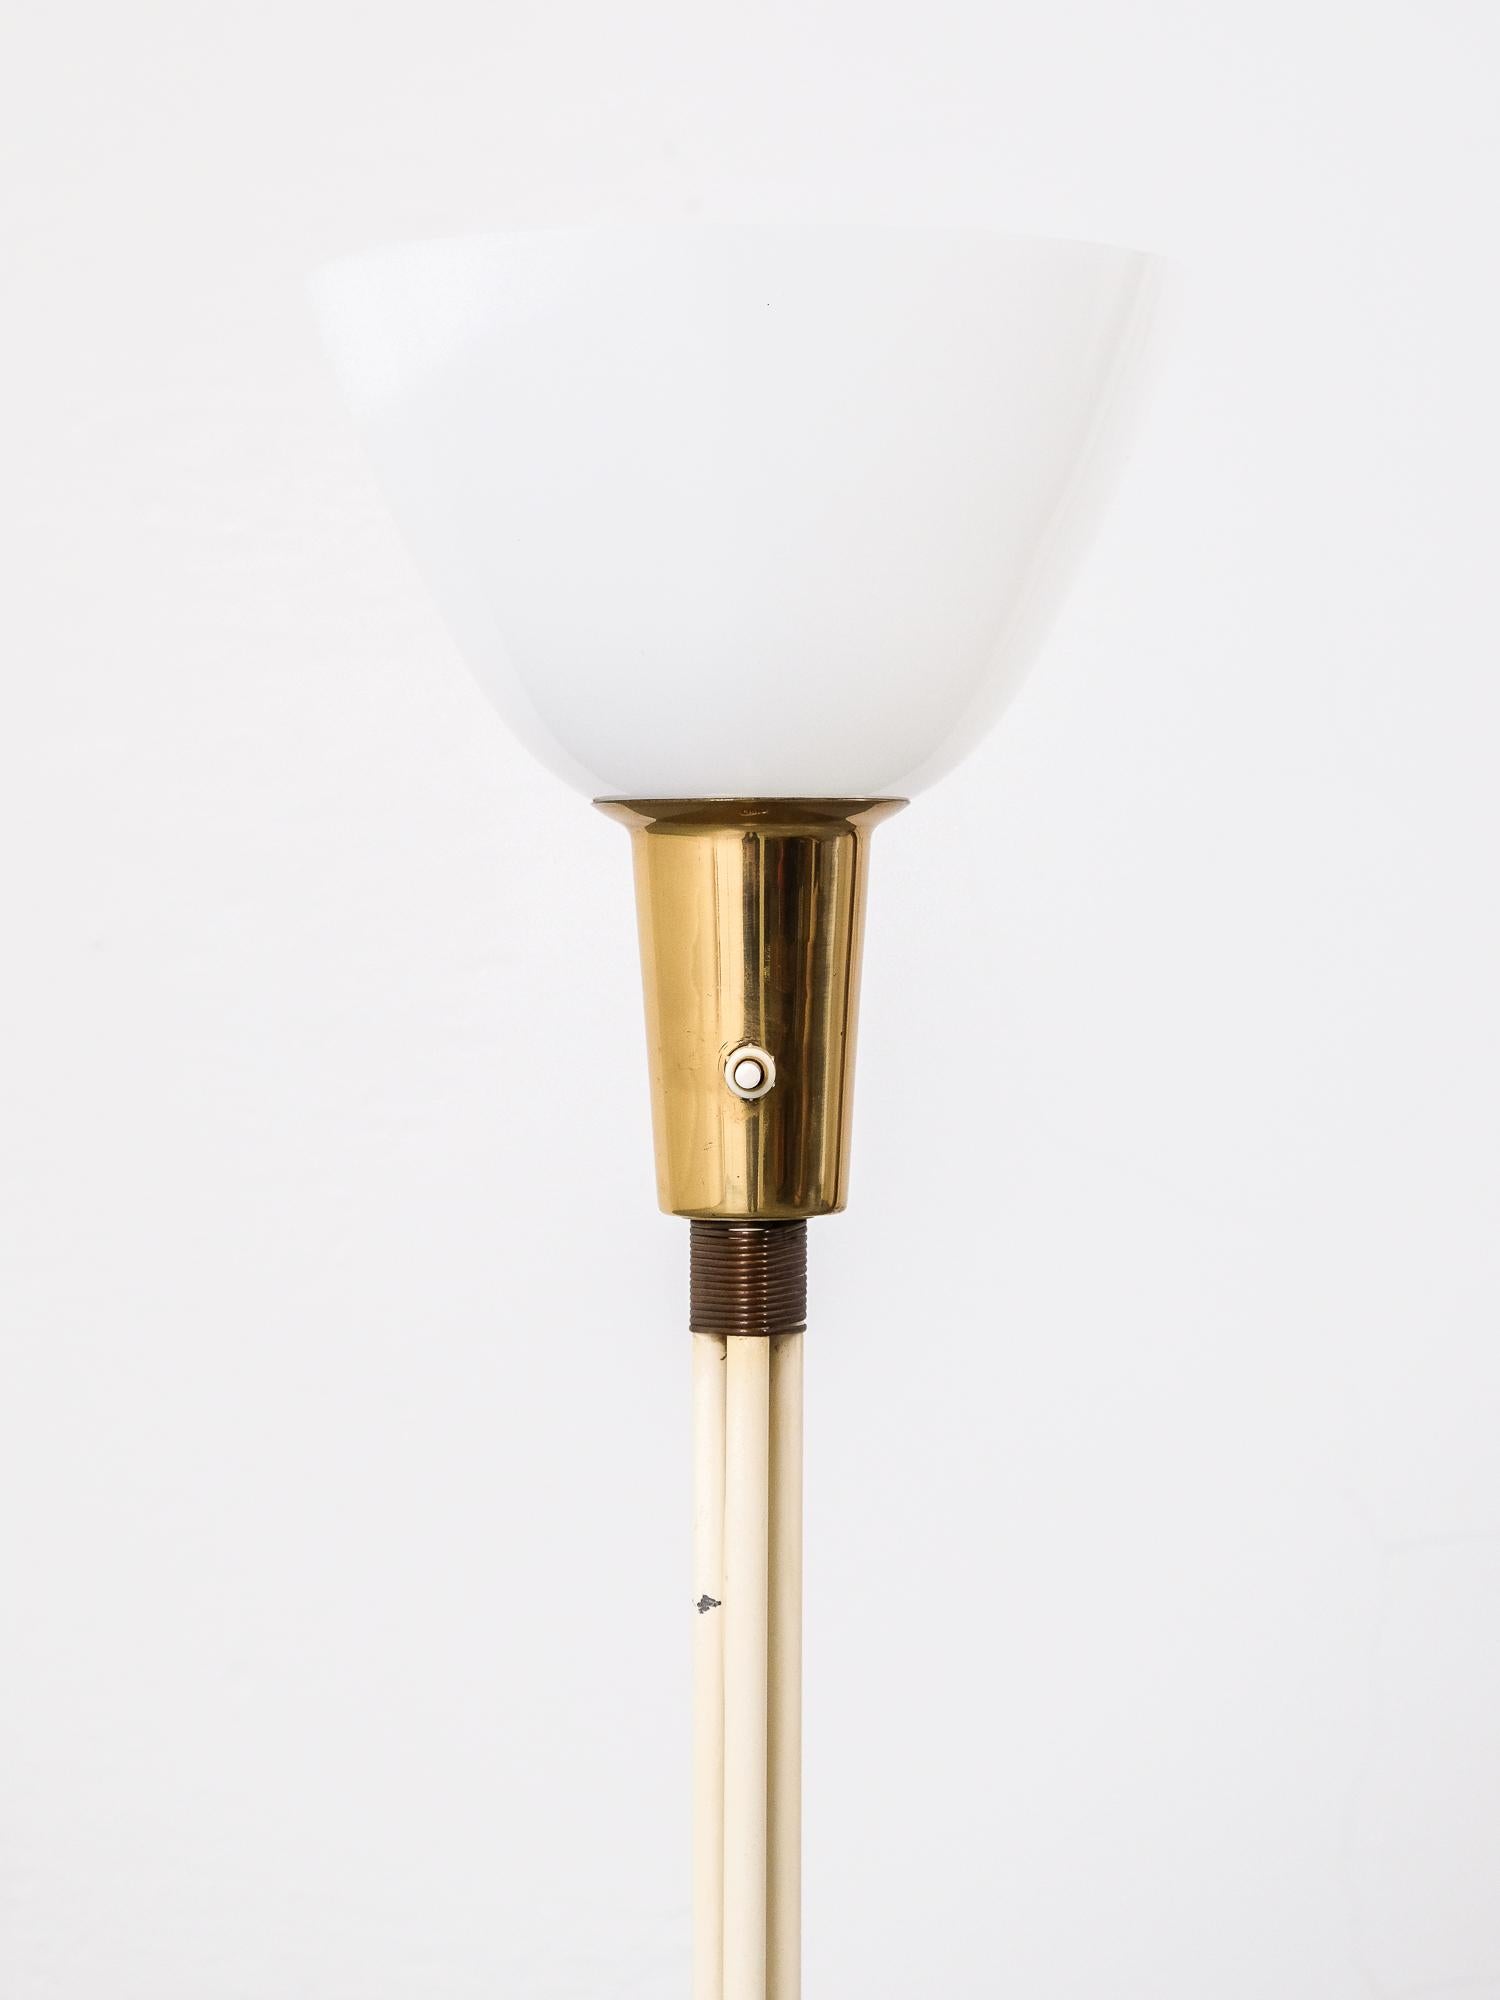 1950s floor lamp designed by Lisa Johansson-Pape for Orno. Rare model 30-058.

Acrylic lamp-shade, painted metal, brass decorations.

Height 148 cm